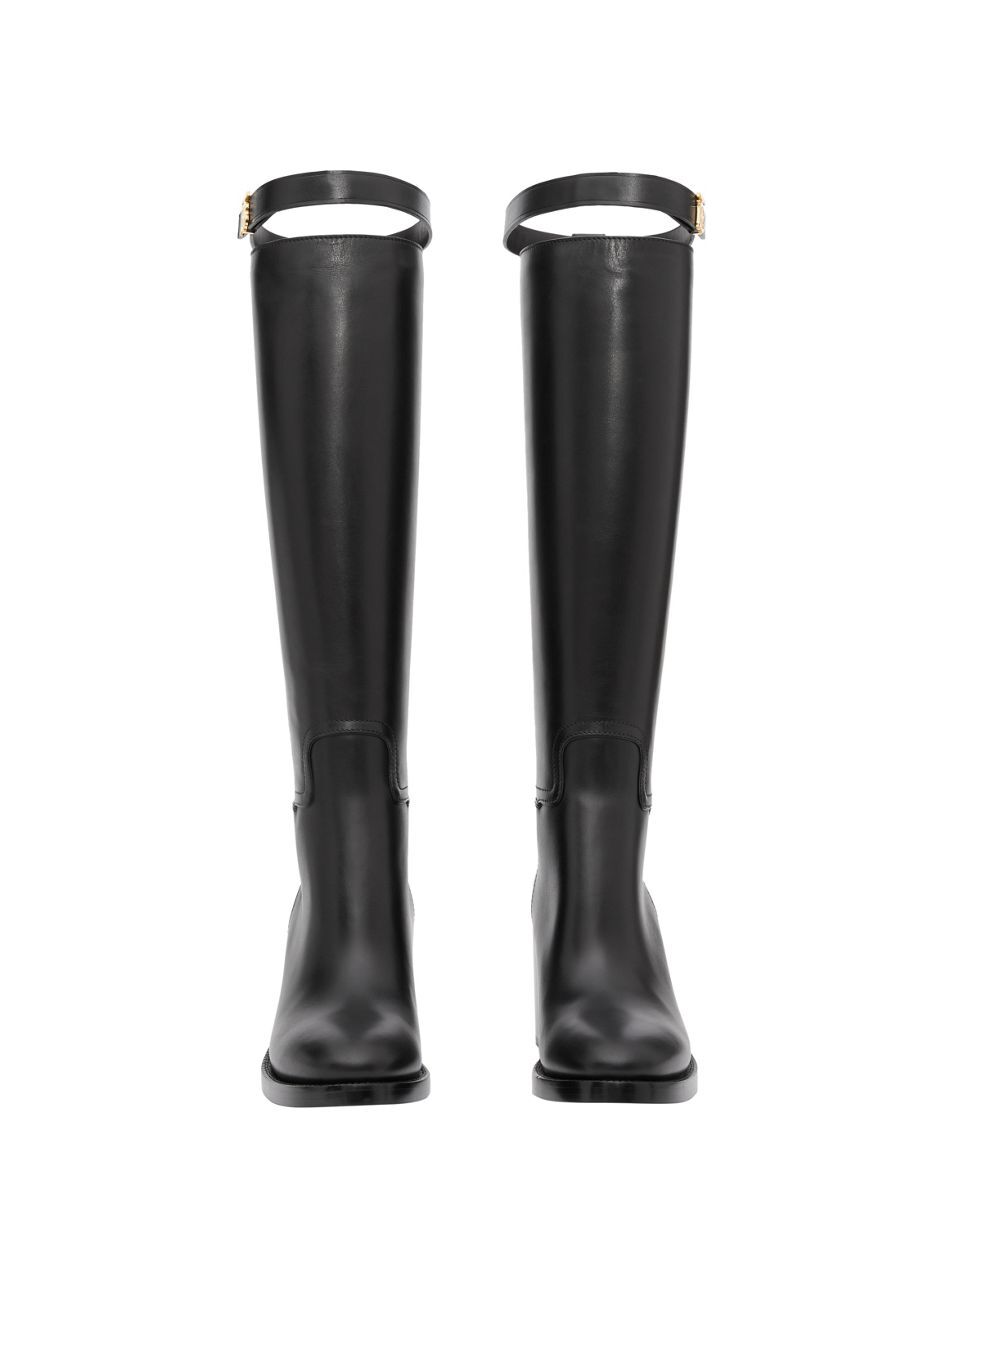 burberry over the knee boots